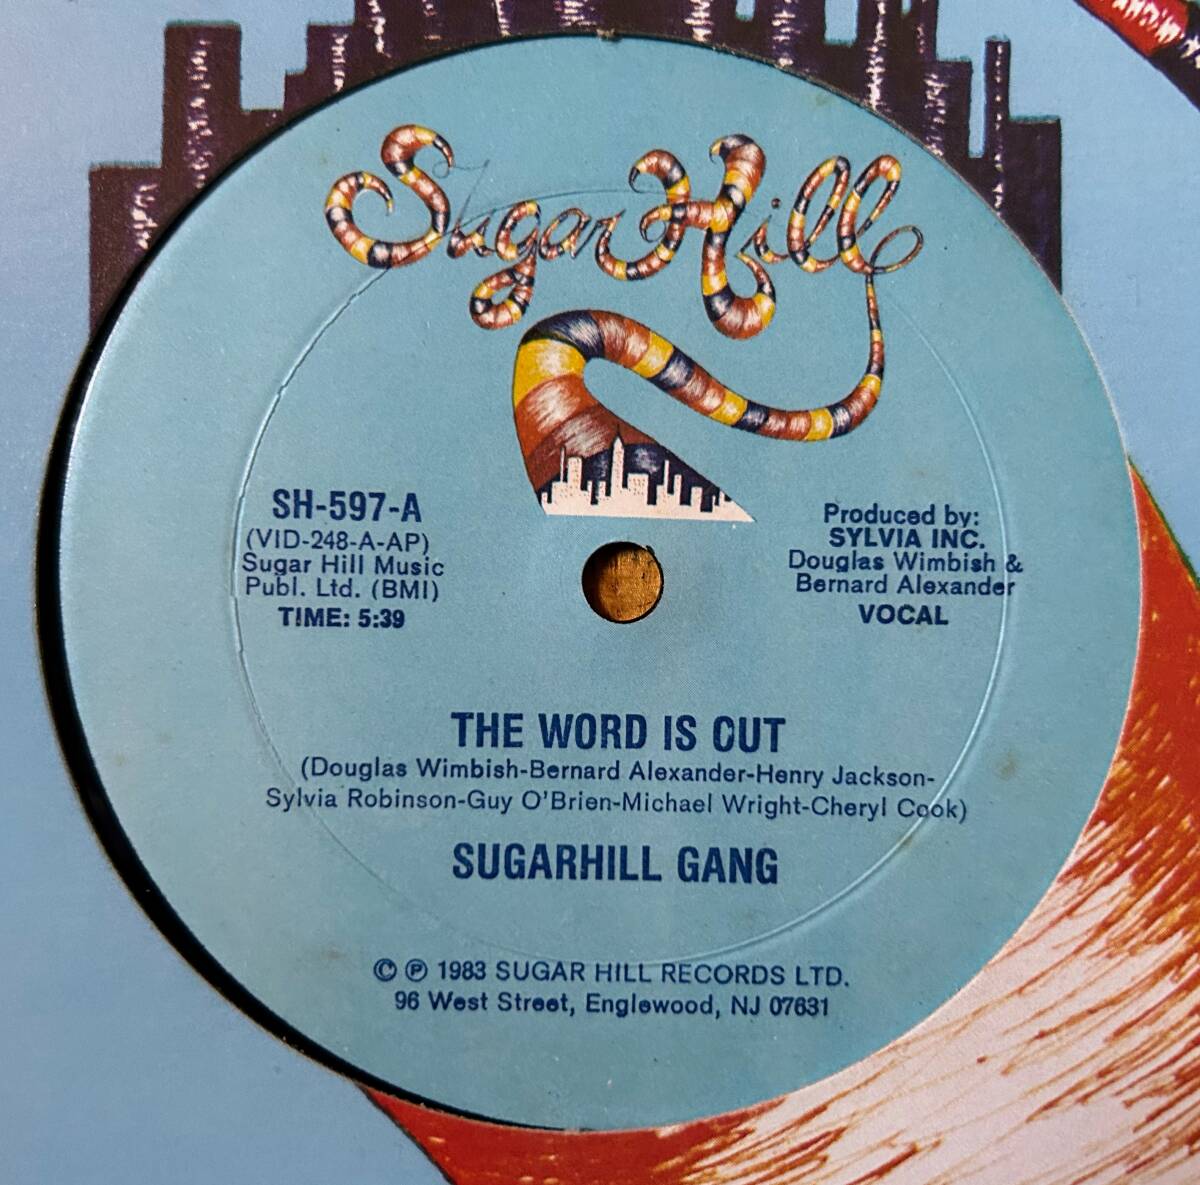 US盤12"EP★The Sugarhill Gang★The Word Is Out★83年★OLD SCHOOL RAP★超音波洗浄済★試聴可能_画像2